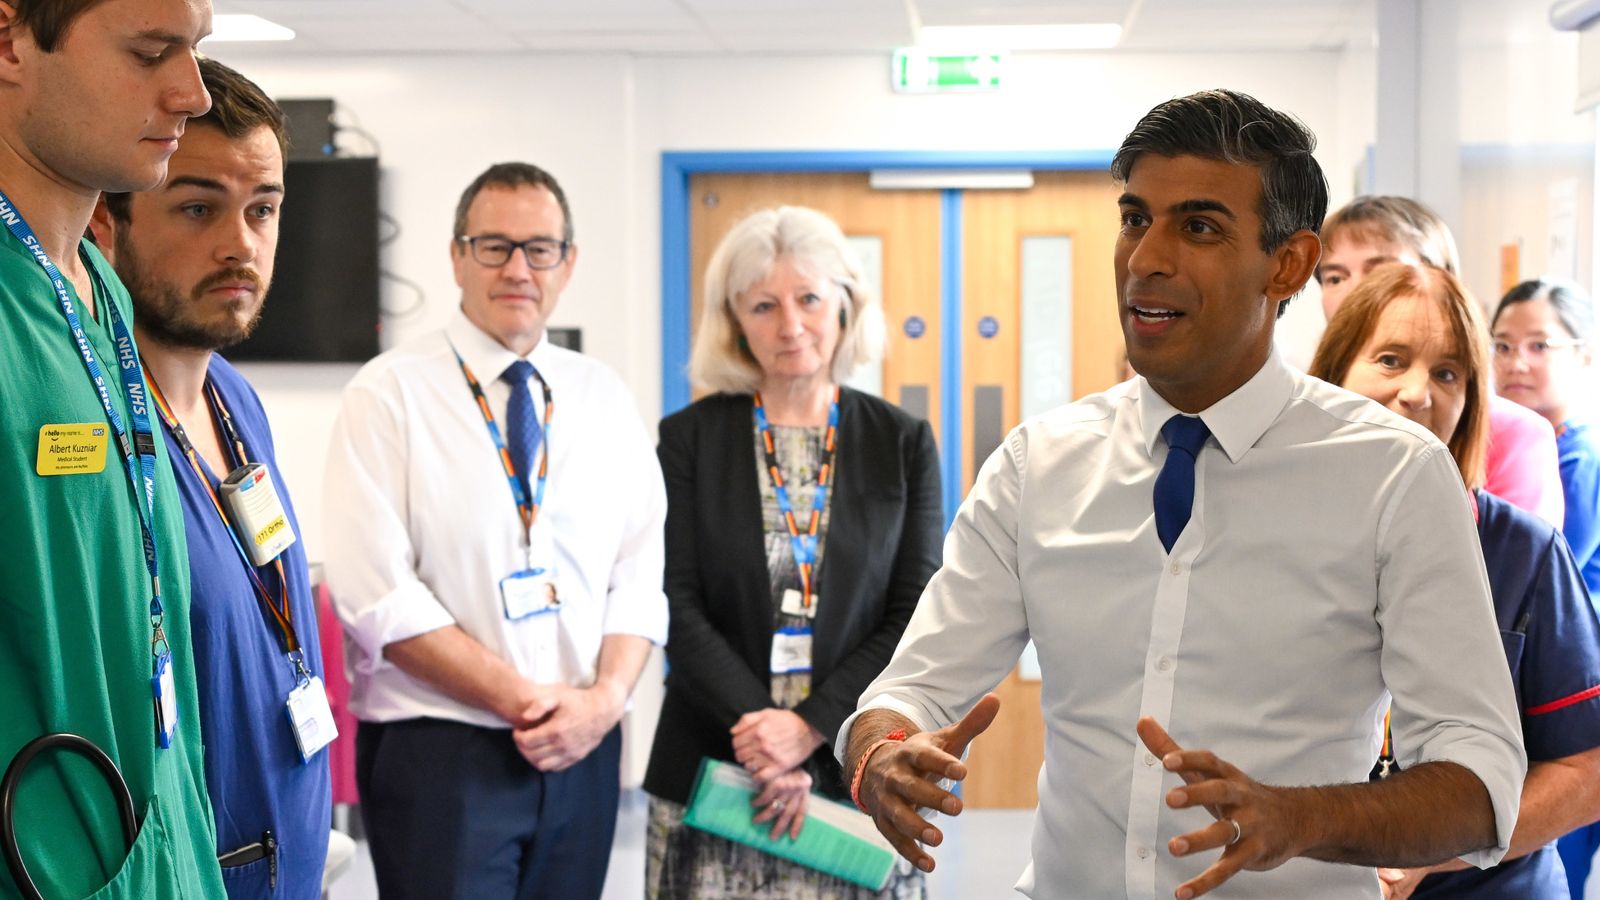 General election: Rishi Sunak says reforming welfare is 'moral mission' as he pledges to cut rising costs of benefits